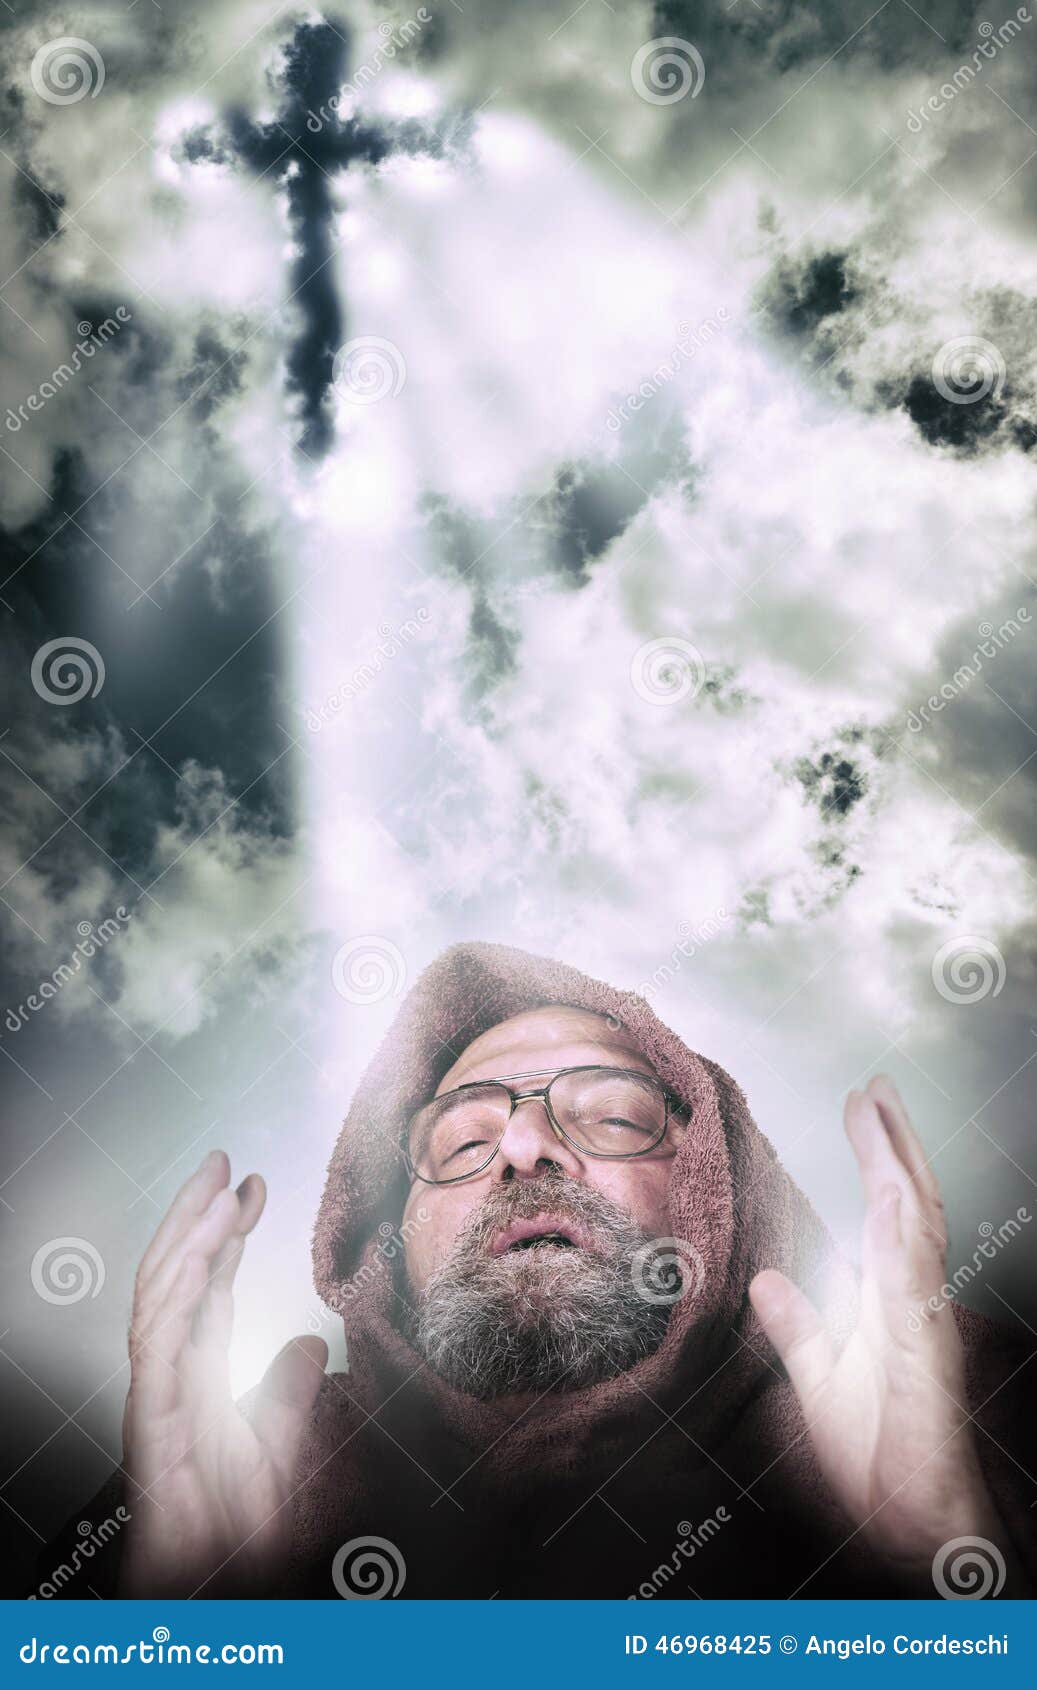 Man Vocation Illuminted by Cross Light from the Clouds Stock Image photo